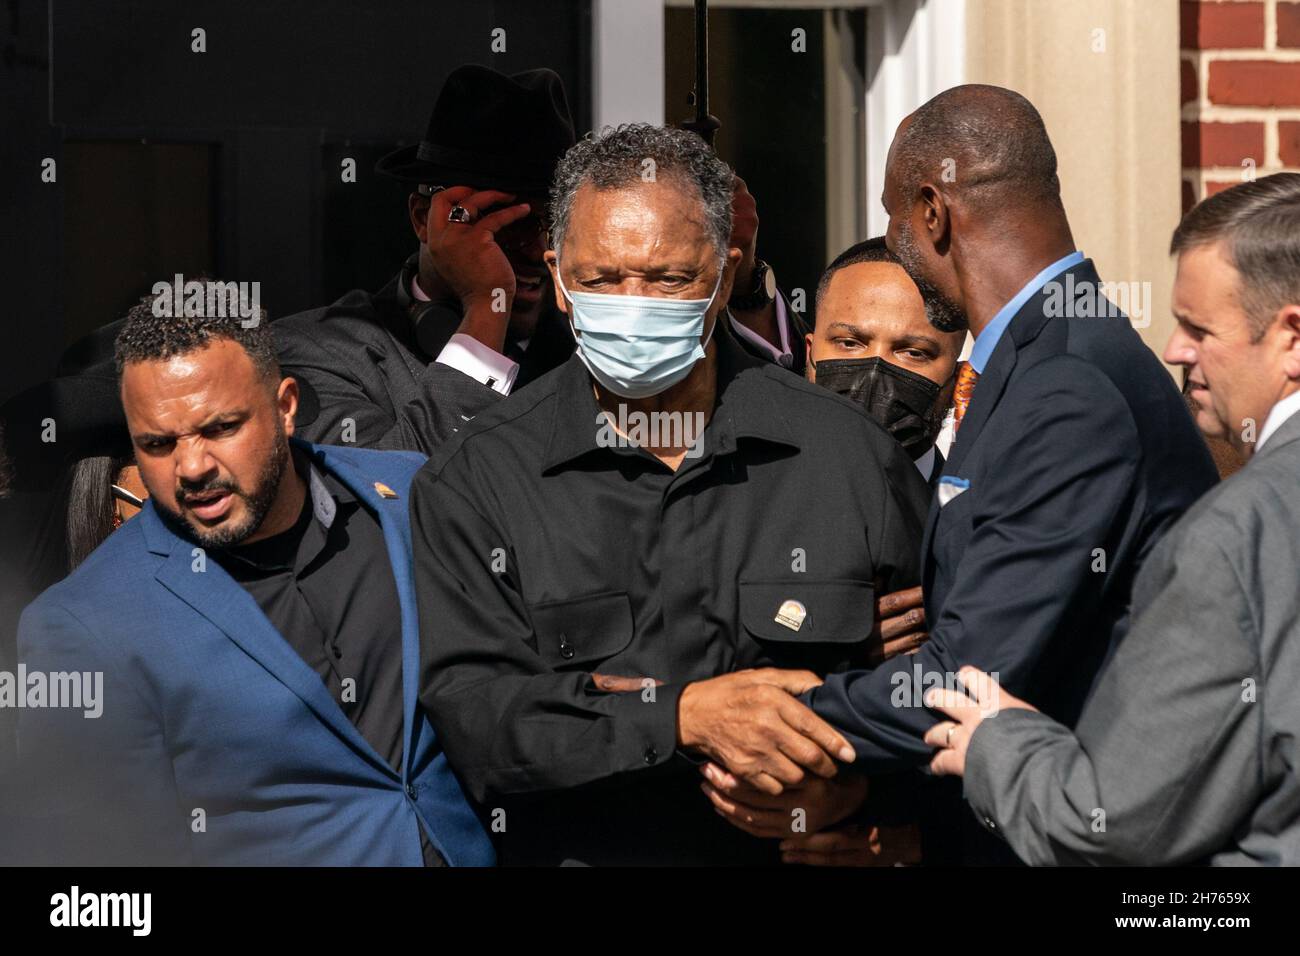 Rev. Jesse Jackson, center, is escorted through the crowd during the Wall of Prayer event in support of justice for Ahmaud Arbery outside the Glynn County Courthouse November 18, 2021 in Brunswick, Georgia. The trial of defendants Greg McMichael, Travis McMichael, and a neighbor, William 'Roddie' Bryan continued inside the courthouse. Stock Photo